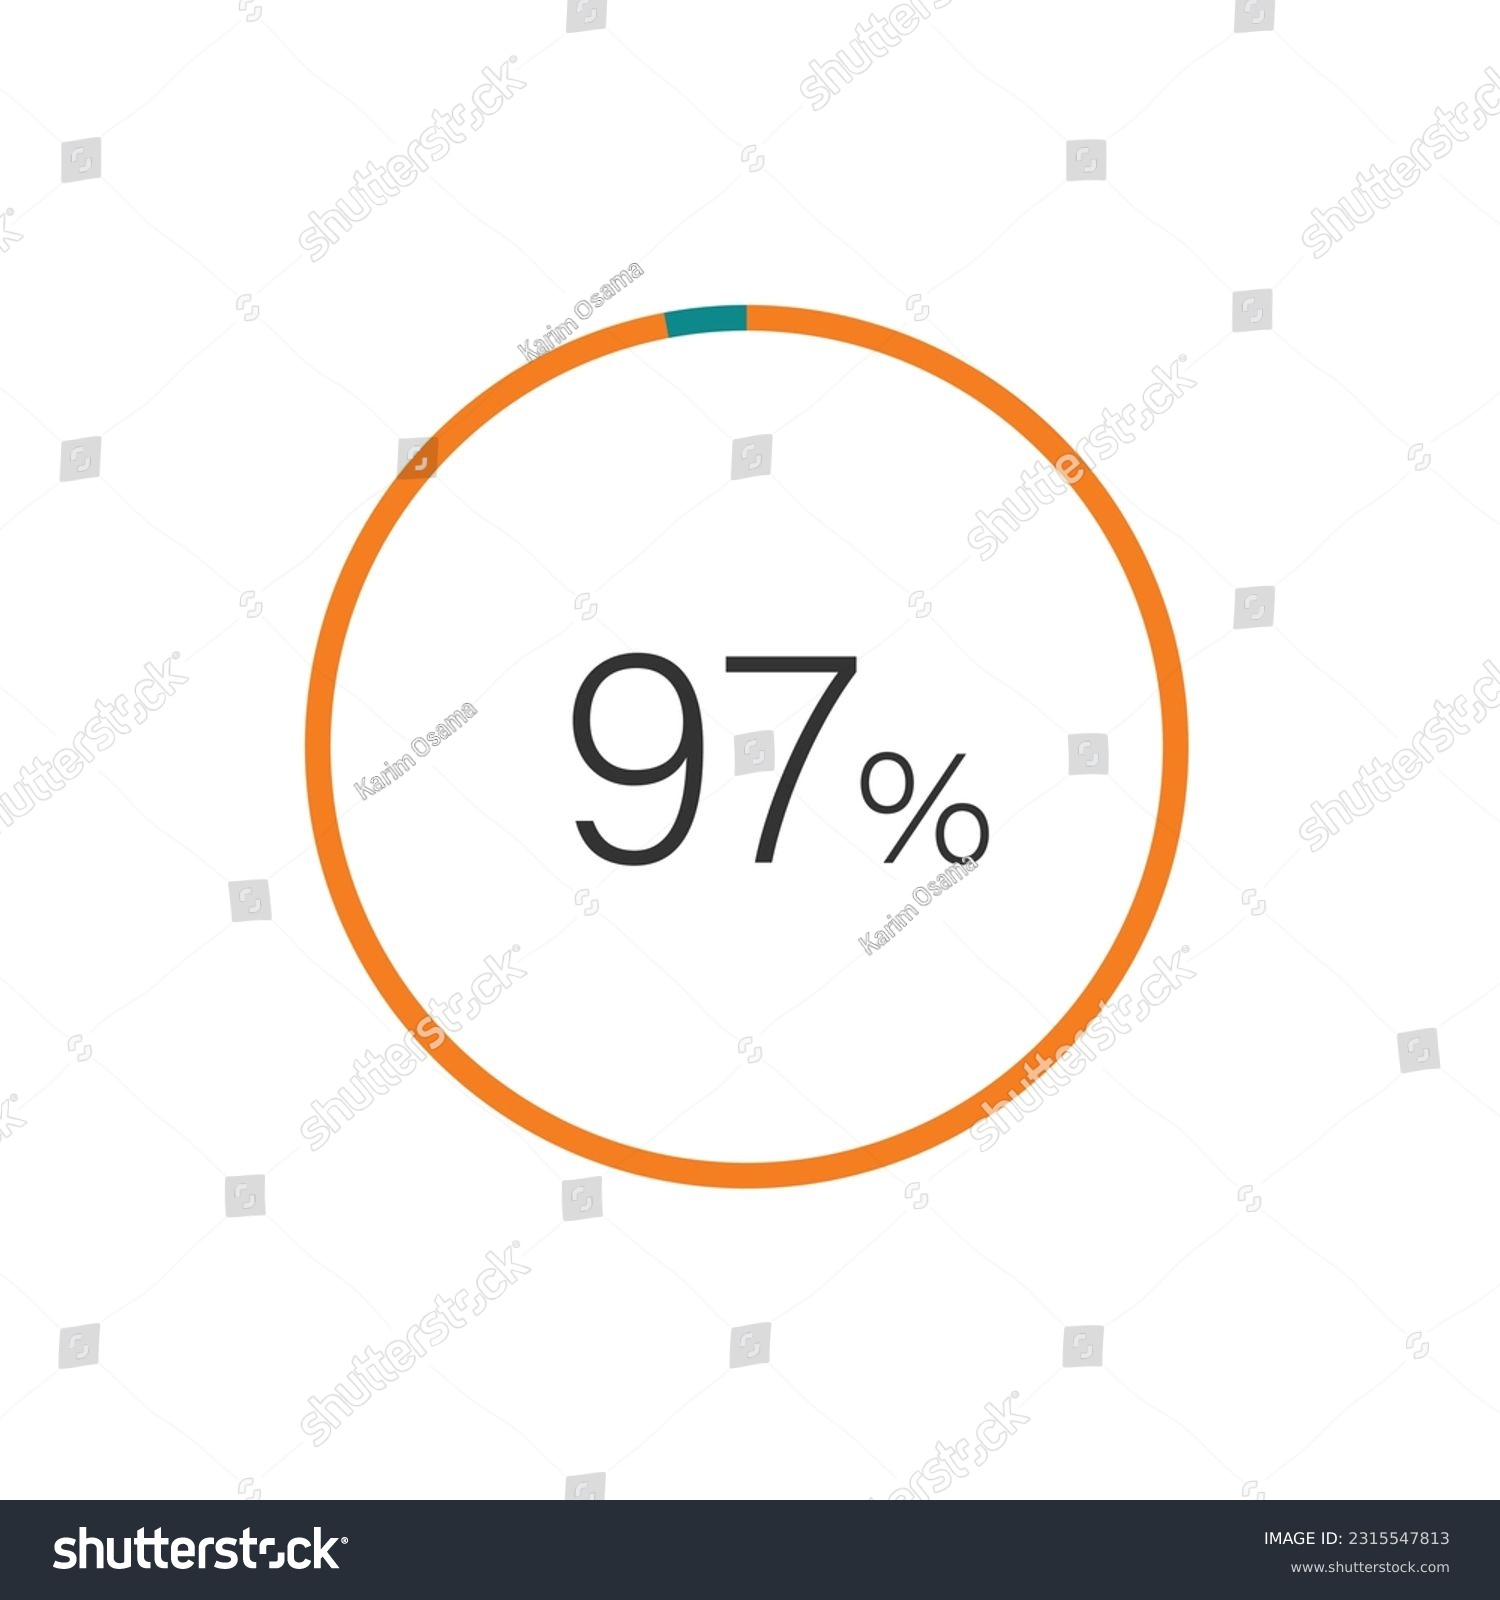 SVG of 97% percent circle chart symbol. 97 percentage Icons for business, finance, report, downloading. svg